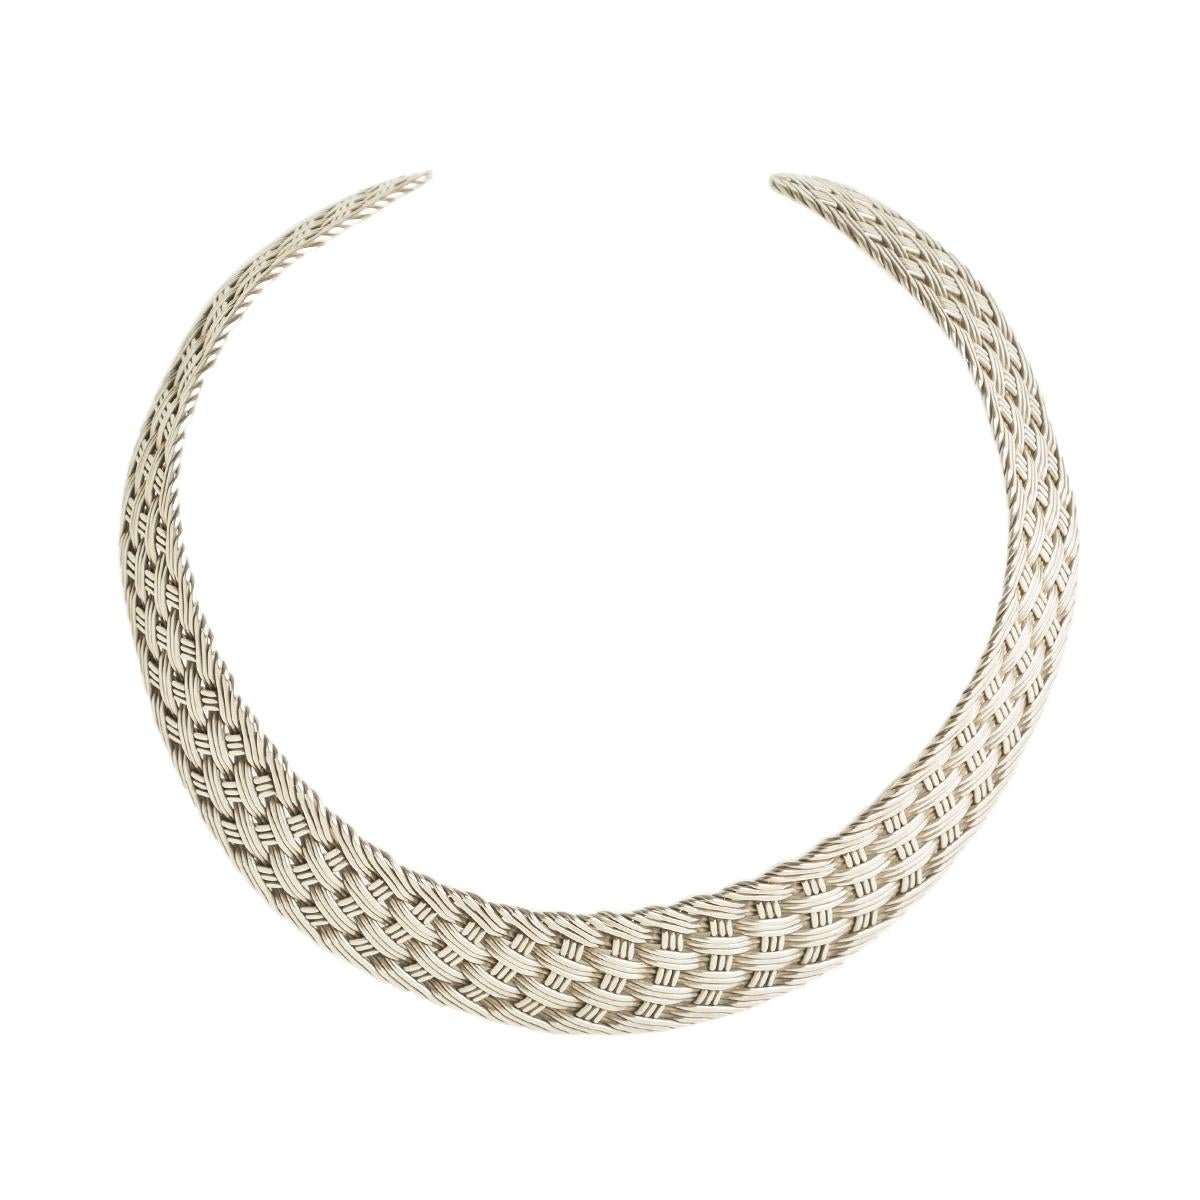 Rigid 925 silver necklace with torque braided pattern, very bright early 20th century modern jewelry design.